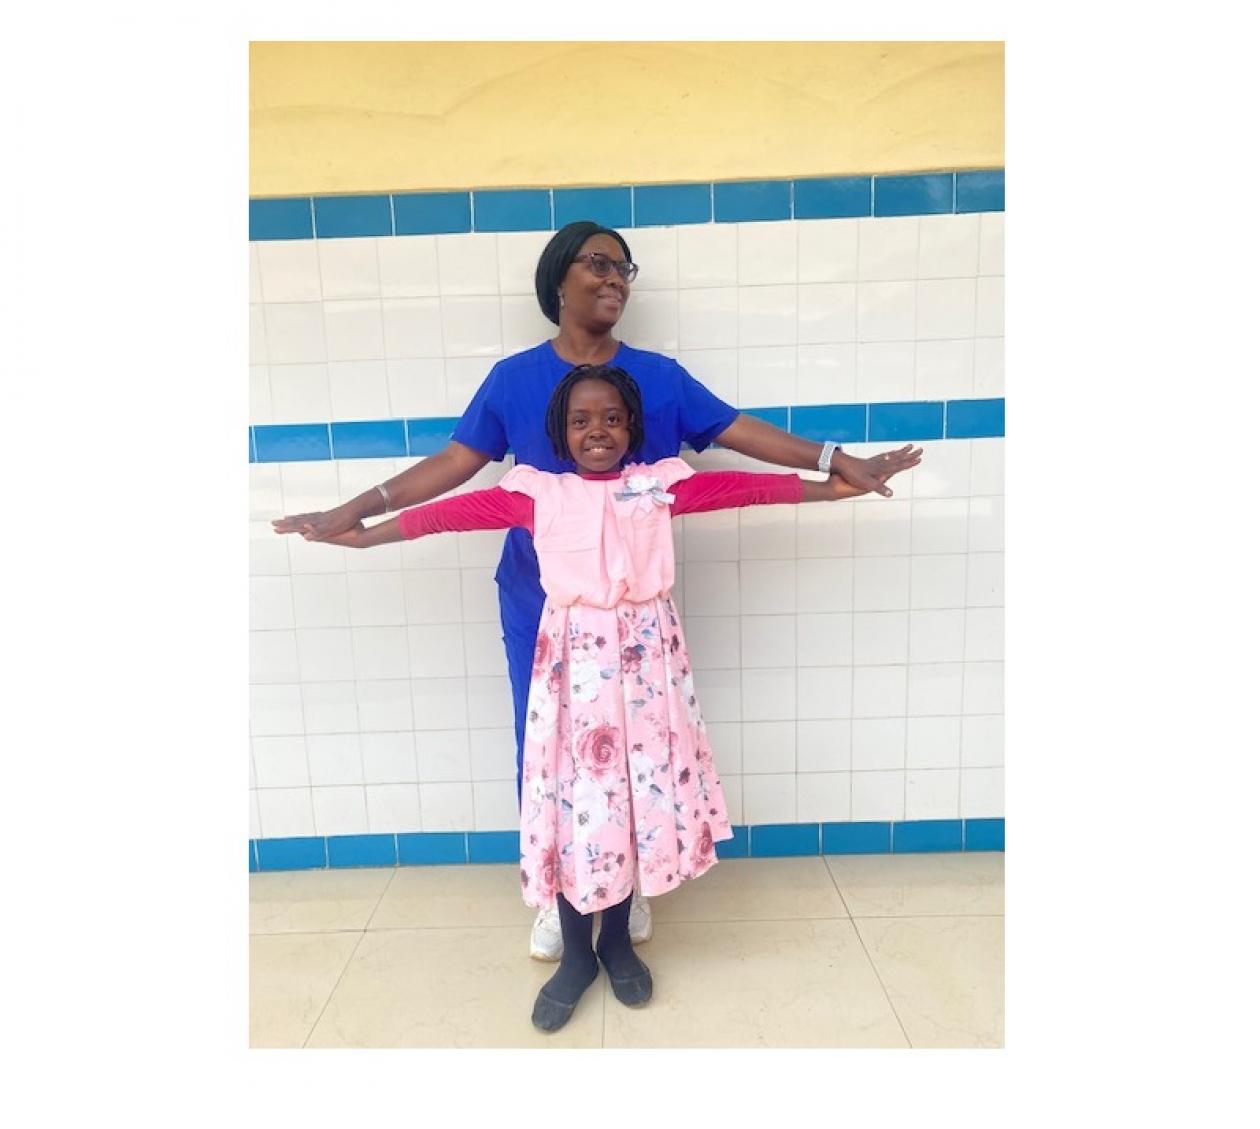 Dr. Kouya Francine standing behind Abigail, her patient. Both are outstretching their arms like wings and both are smiling. They appear to be in a clinical setting.